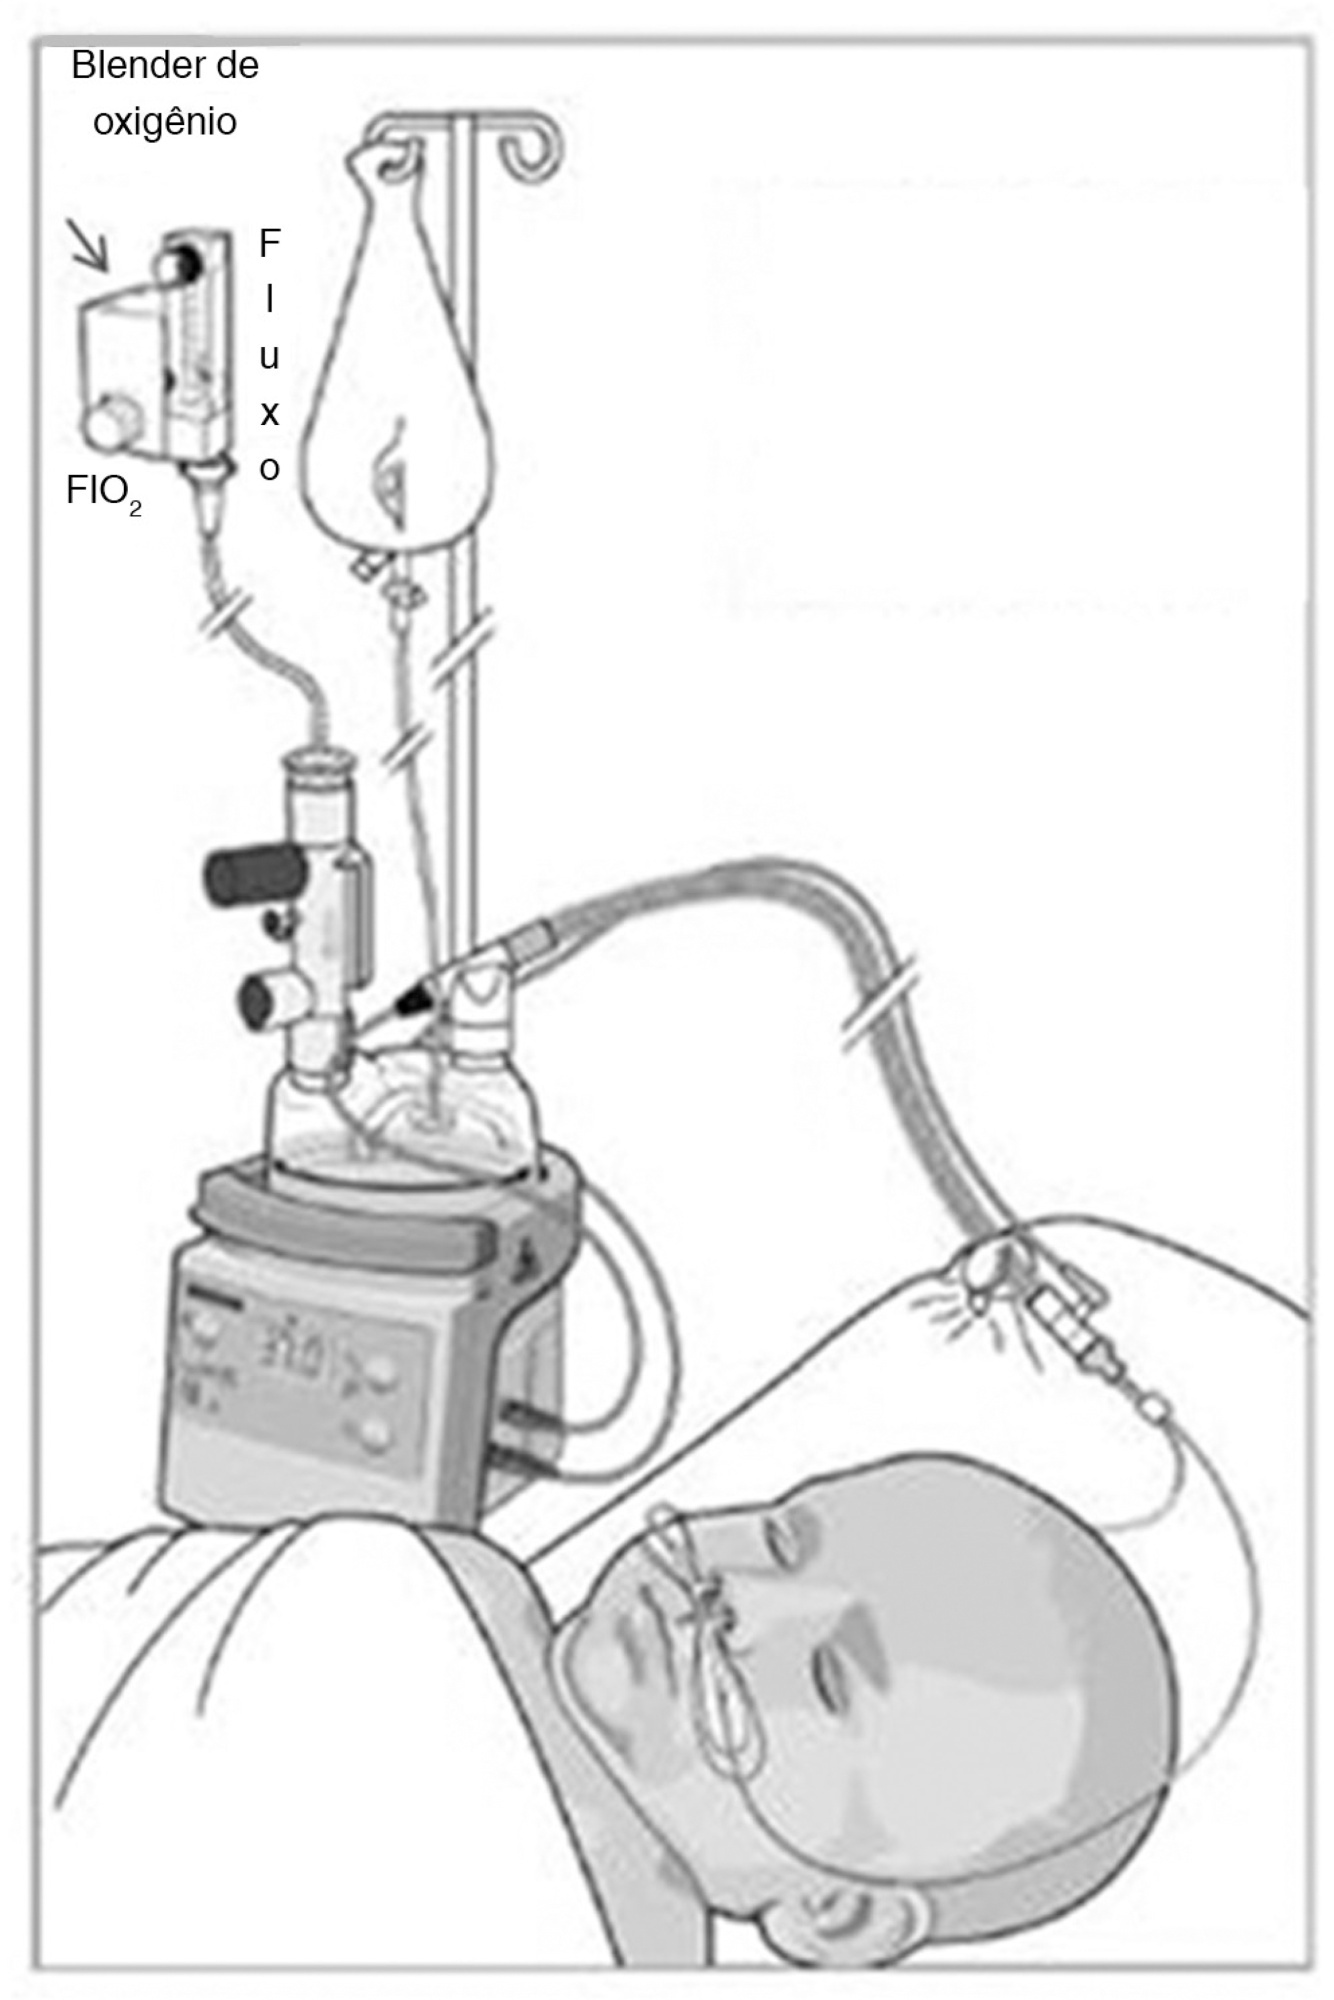 Post-extubation atelectasis in newborns with surgical diseases: a report
               of two cases involving the use of a high-flow nasal cannula